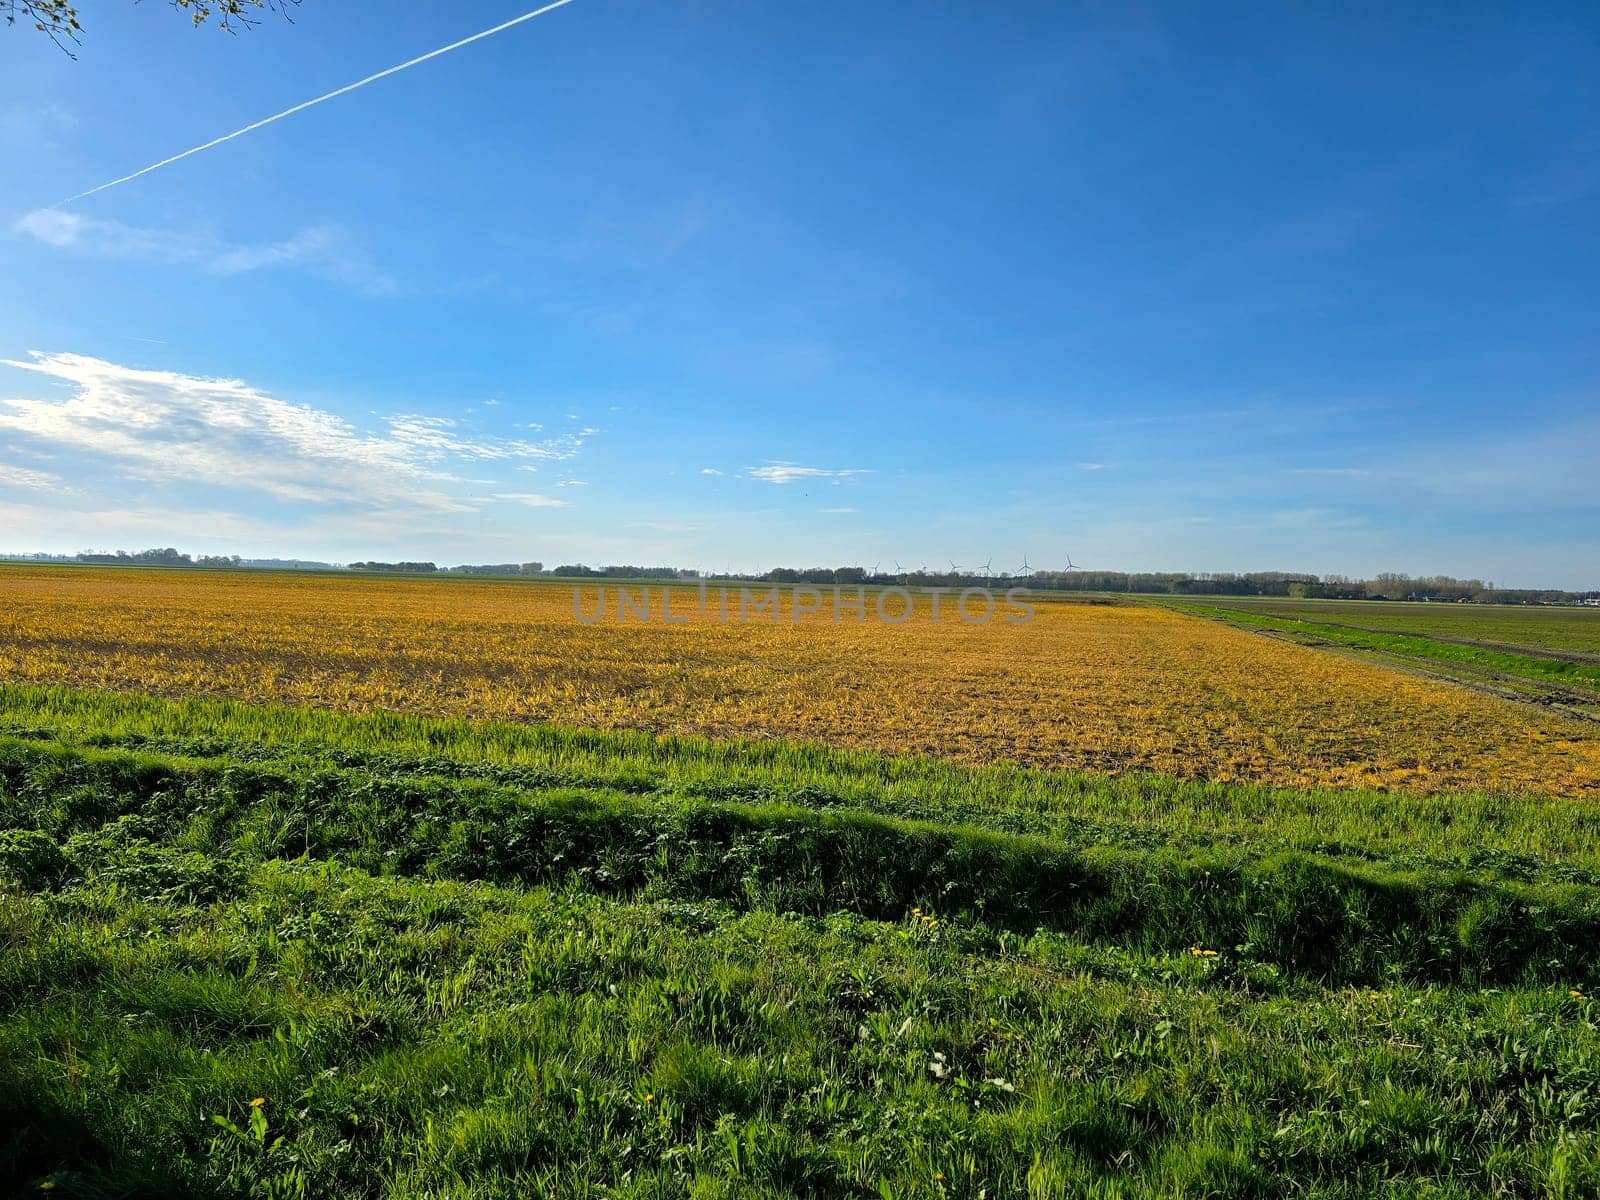 Glyphosate on farmland in the Netherlands, Effect of glyphosate herbicide sprayed on grass weeds prepare for new farm season on agriculture field, Glyphosate herbicide used to control weeds in crops